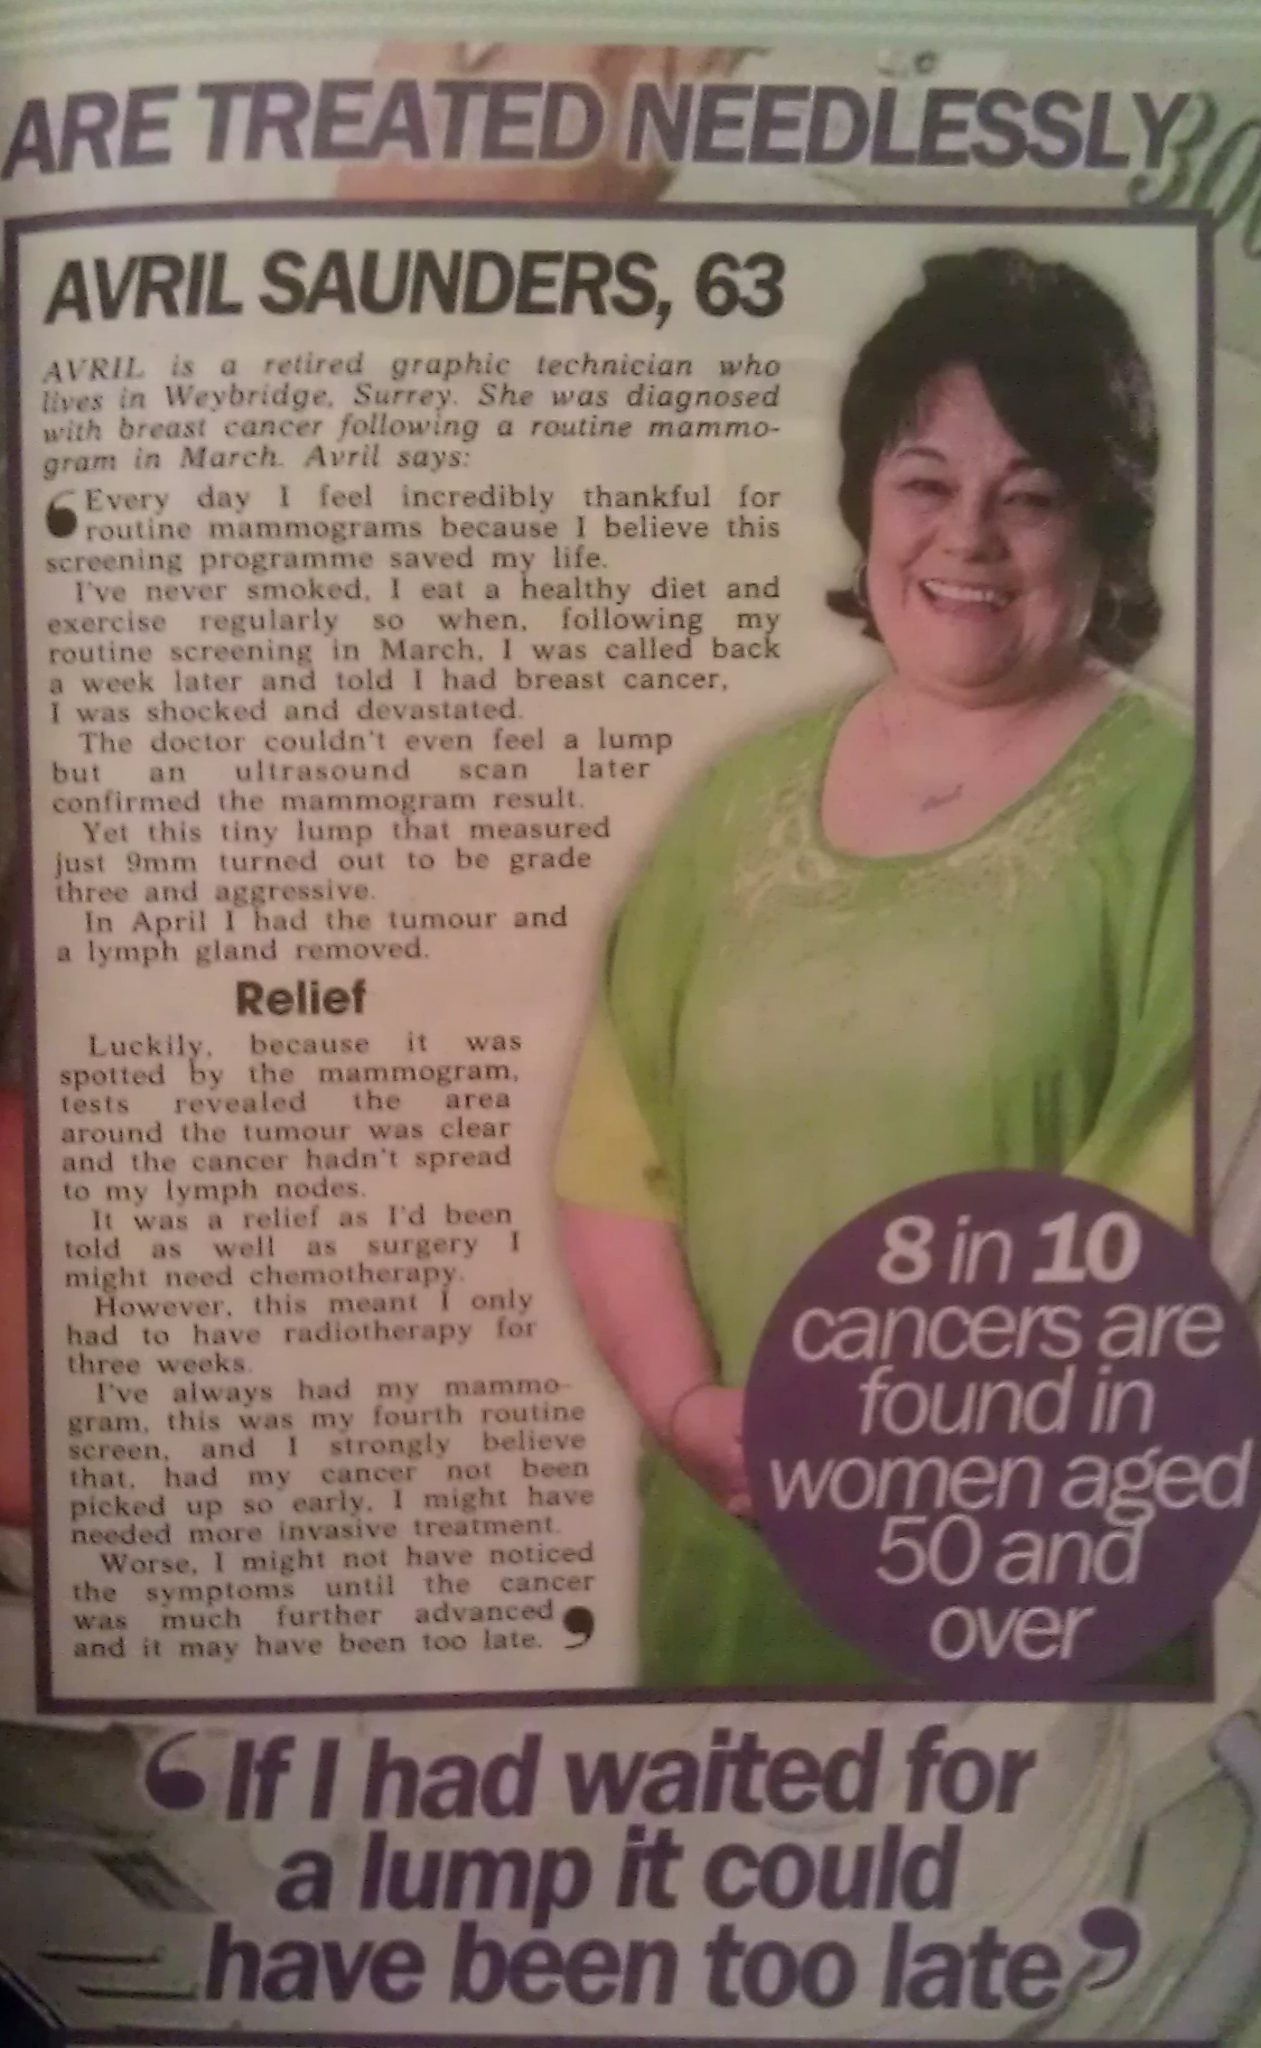 The Sun newspaper - health section